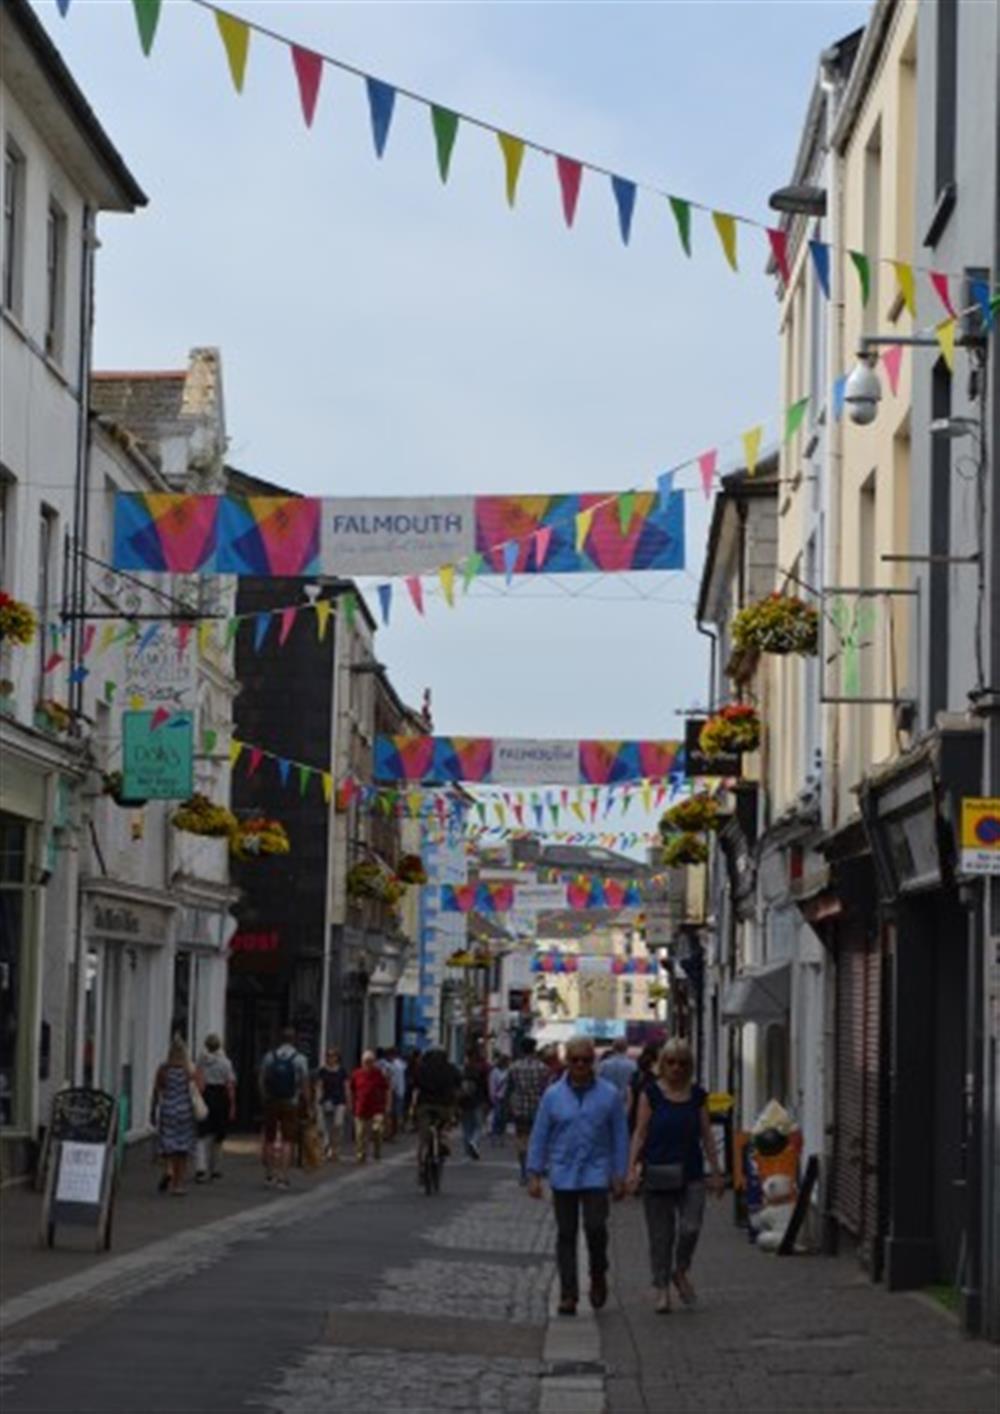 Falmouth town has an array of shops, plus a range of restaurants, cafes and art galleries at Smugglers in Helford Passage